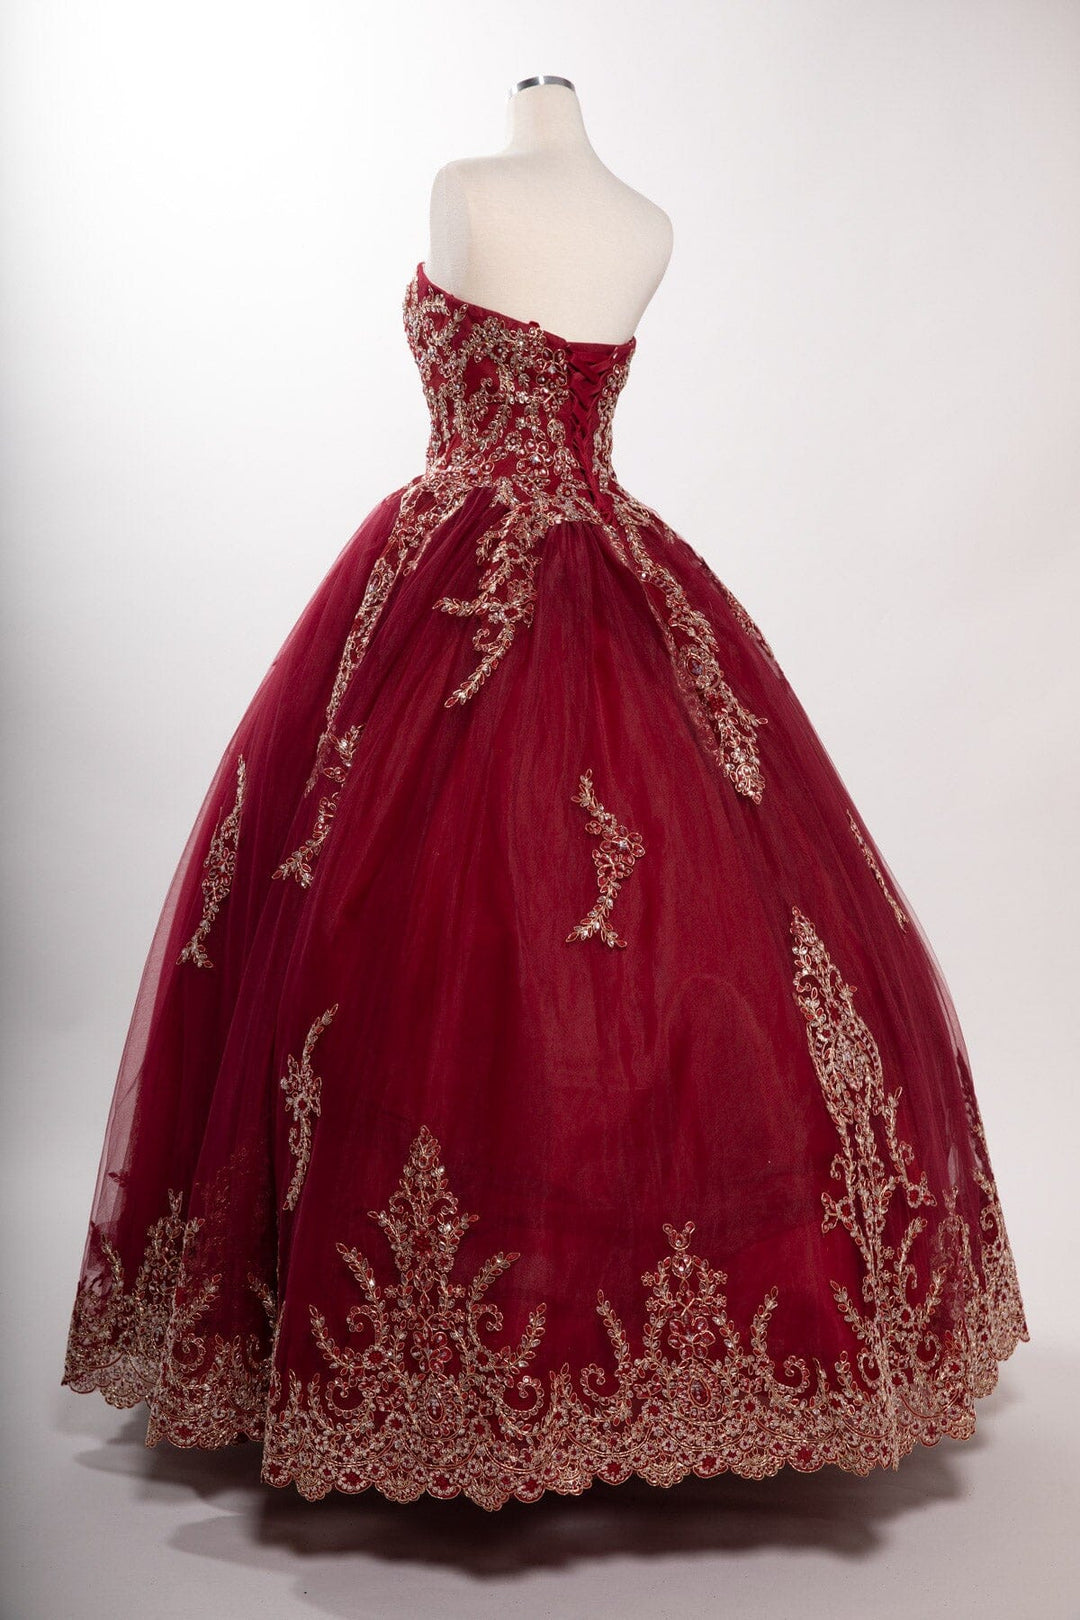 Embroidered Strapless Cape Ball Gown by Coya L2726